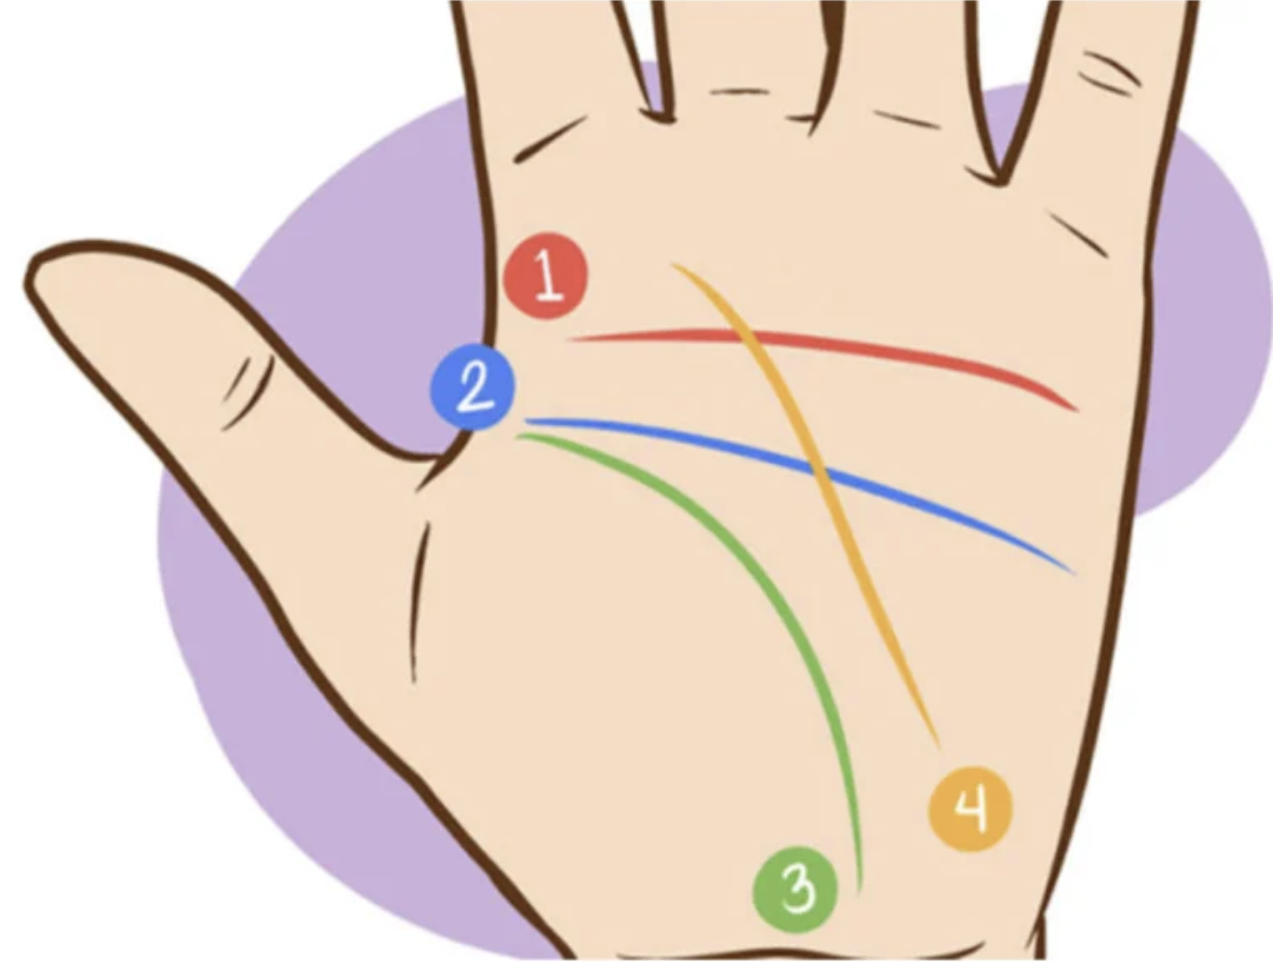 Discover the Meaning Behind the M on Your Palm